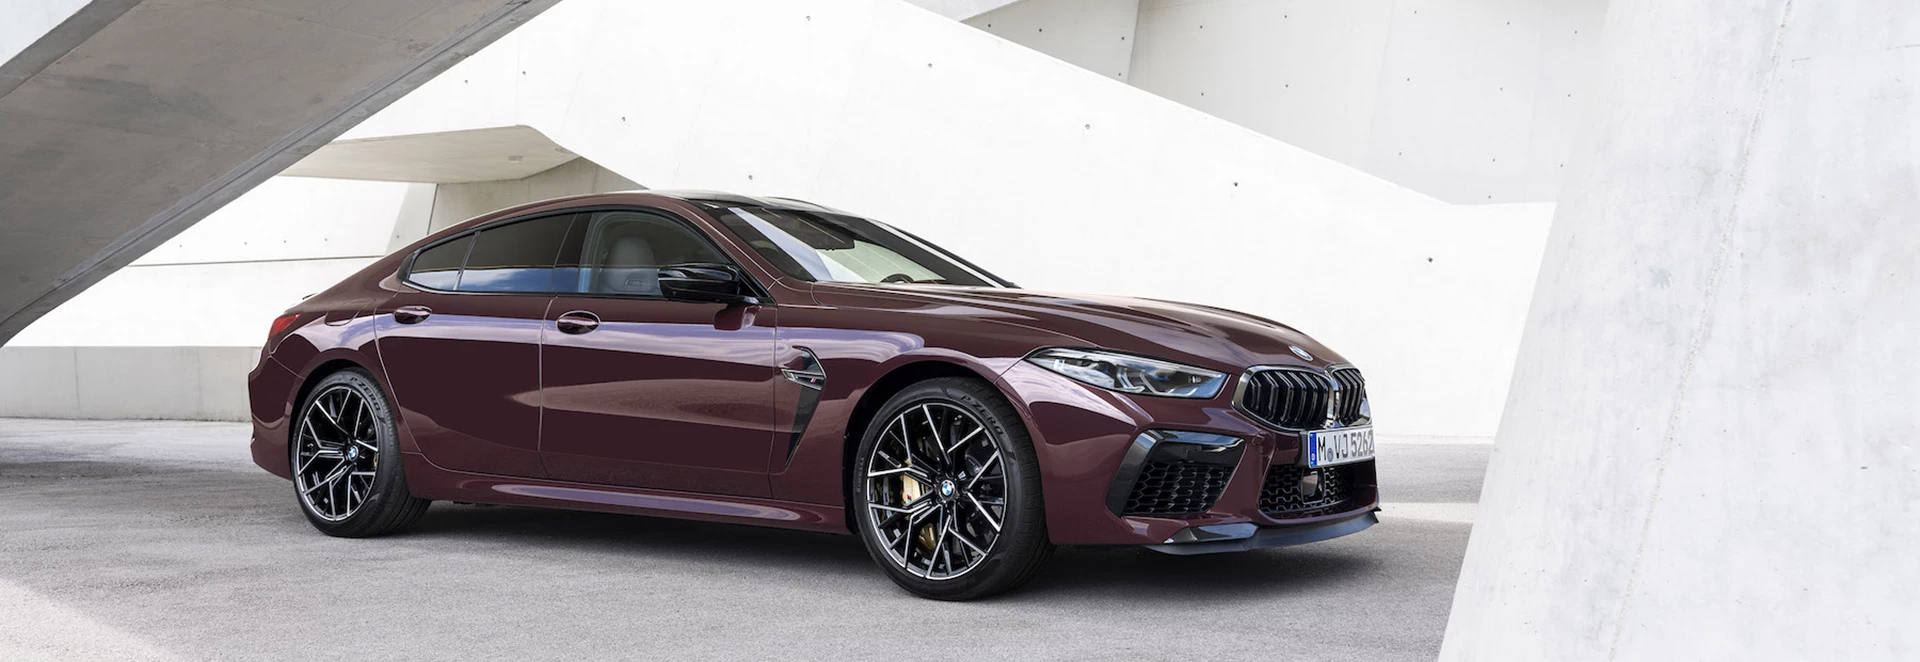 2020 BMW M8 Competition Gran Coupe unveiled as glamourous four-door sports car